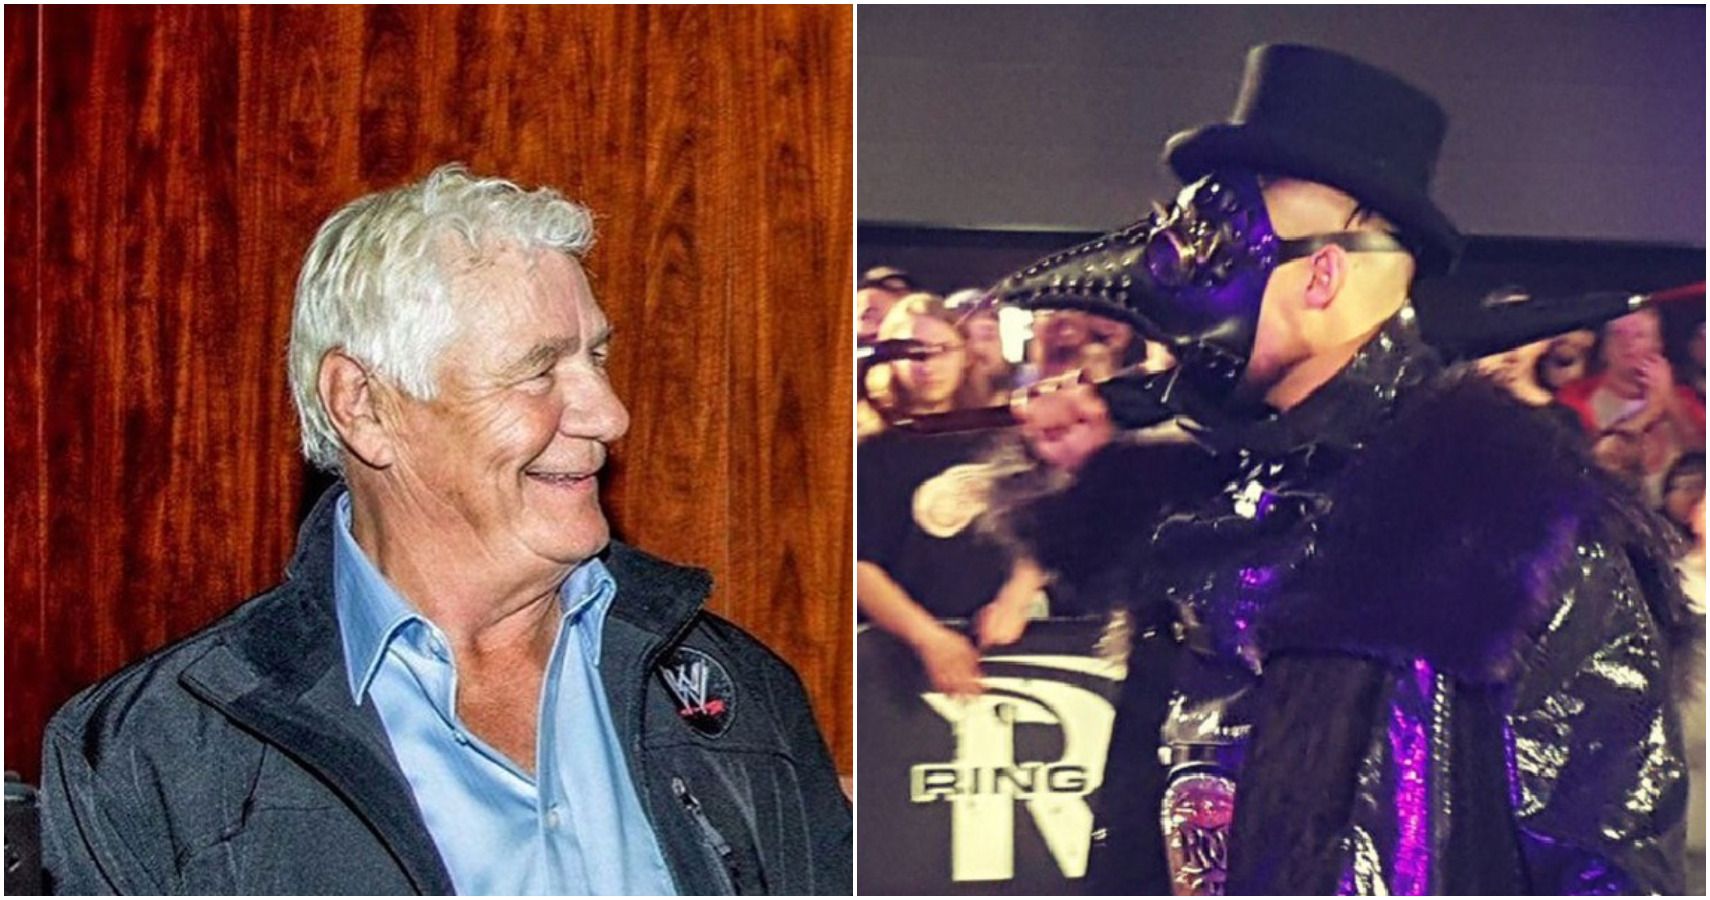 Pat Patterson, Marty Scurll